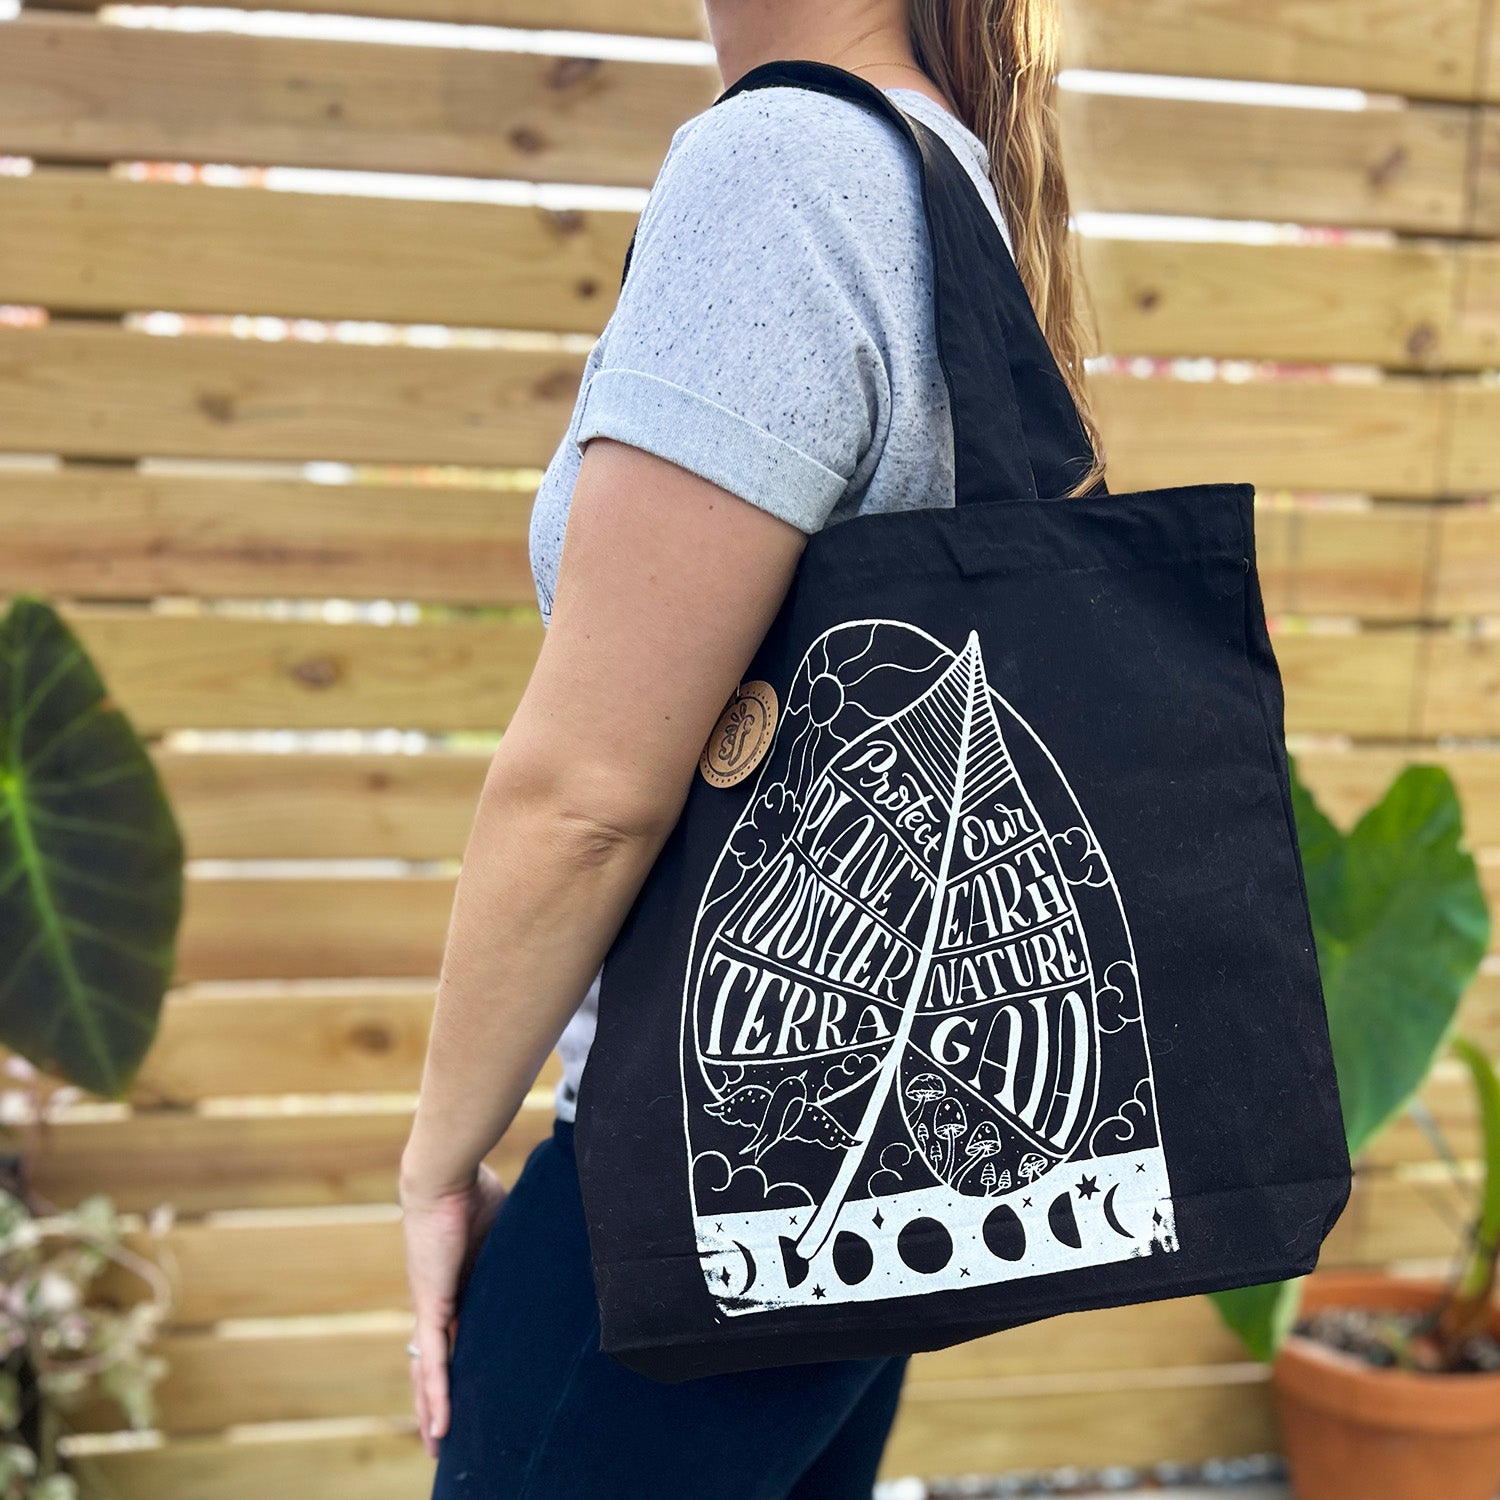 Protect Mother Nature | Black Tote Bag.